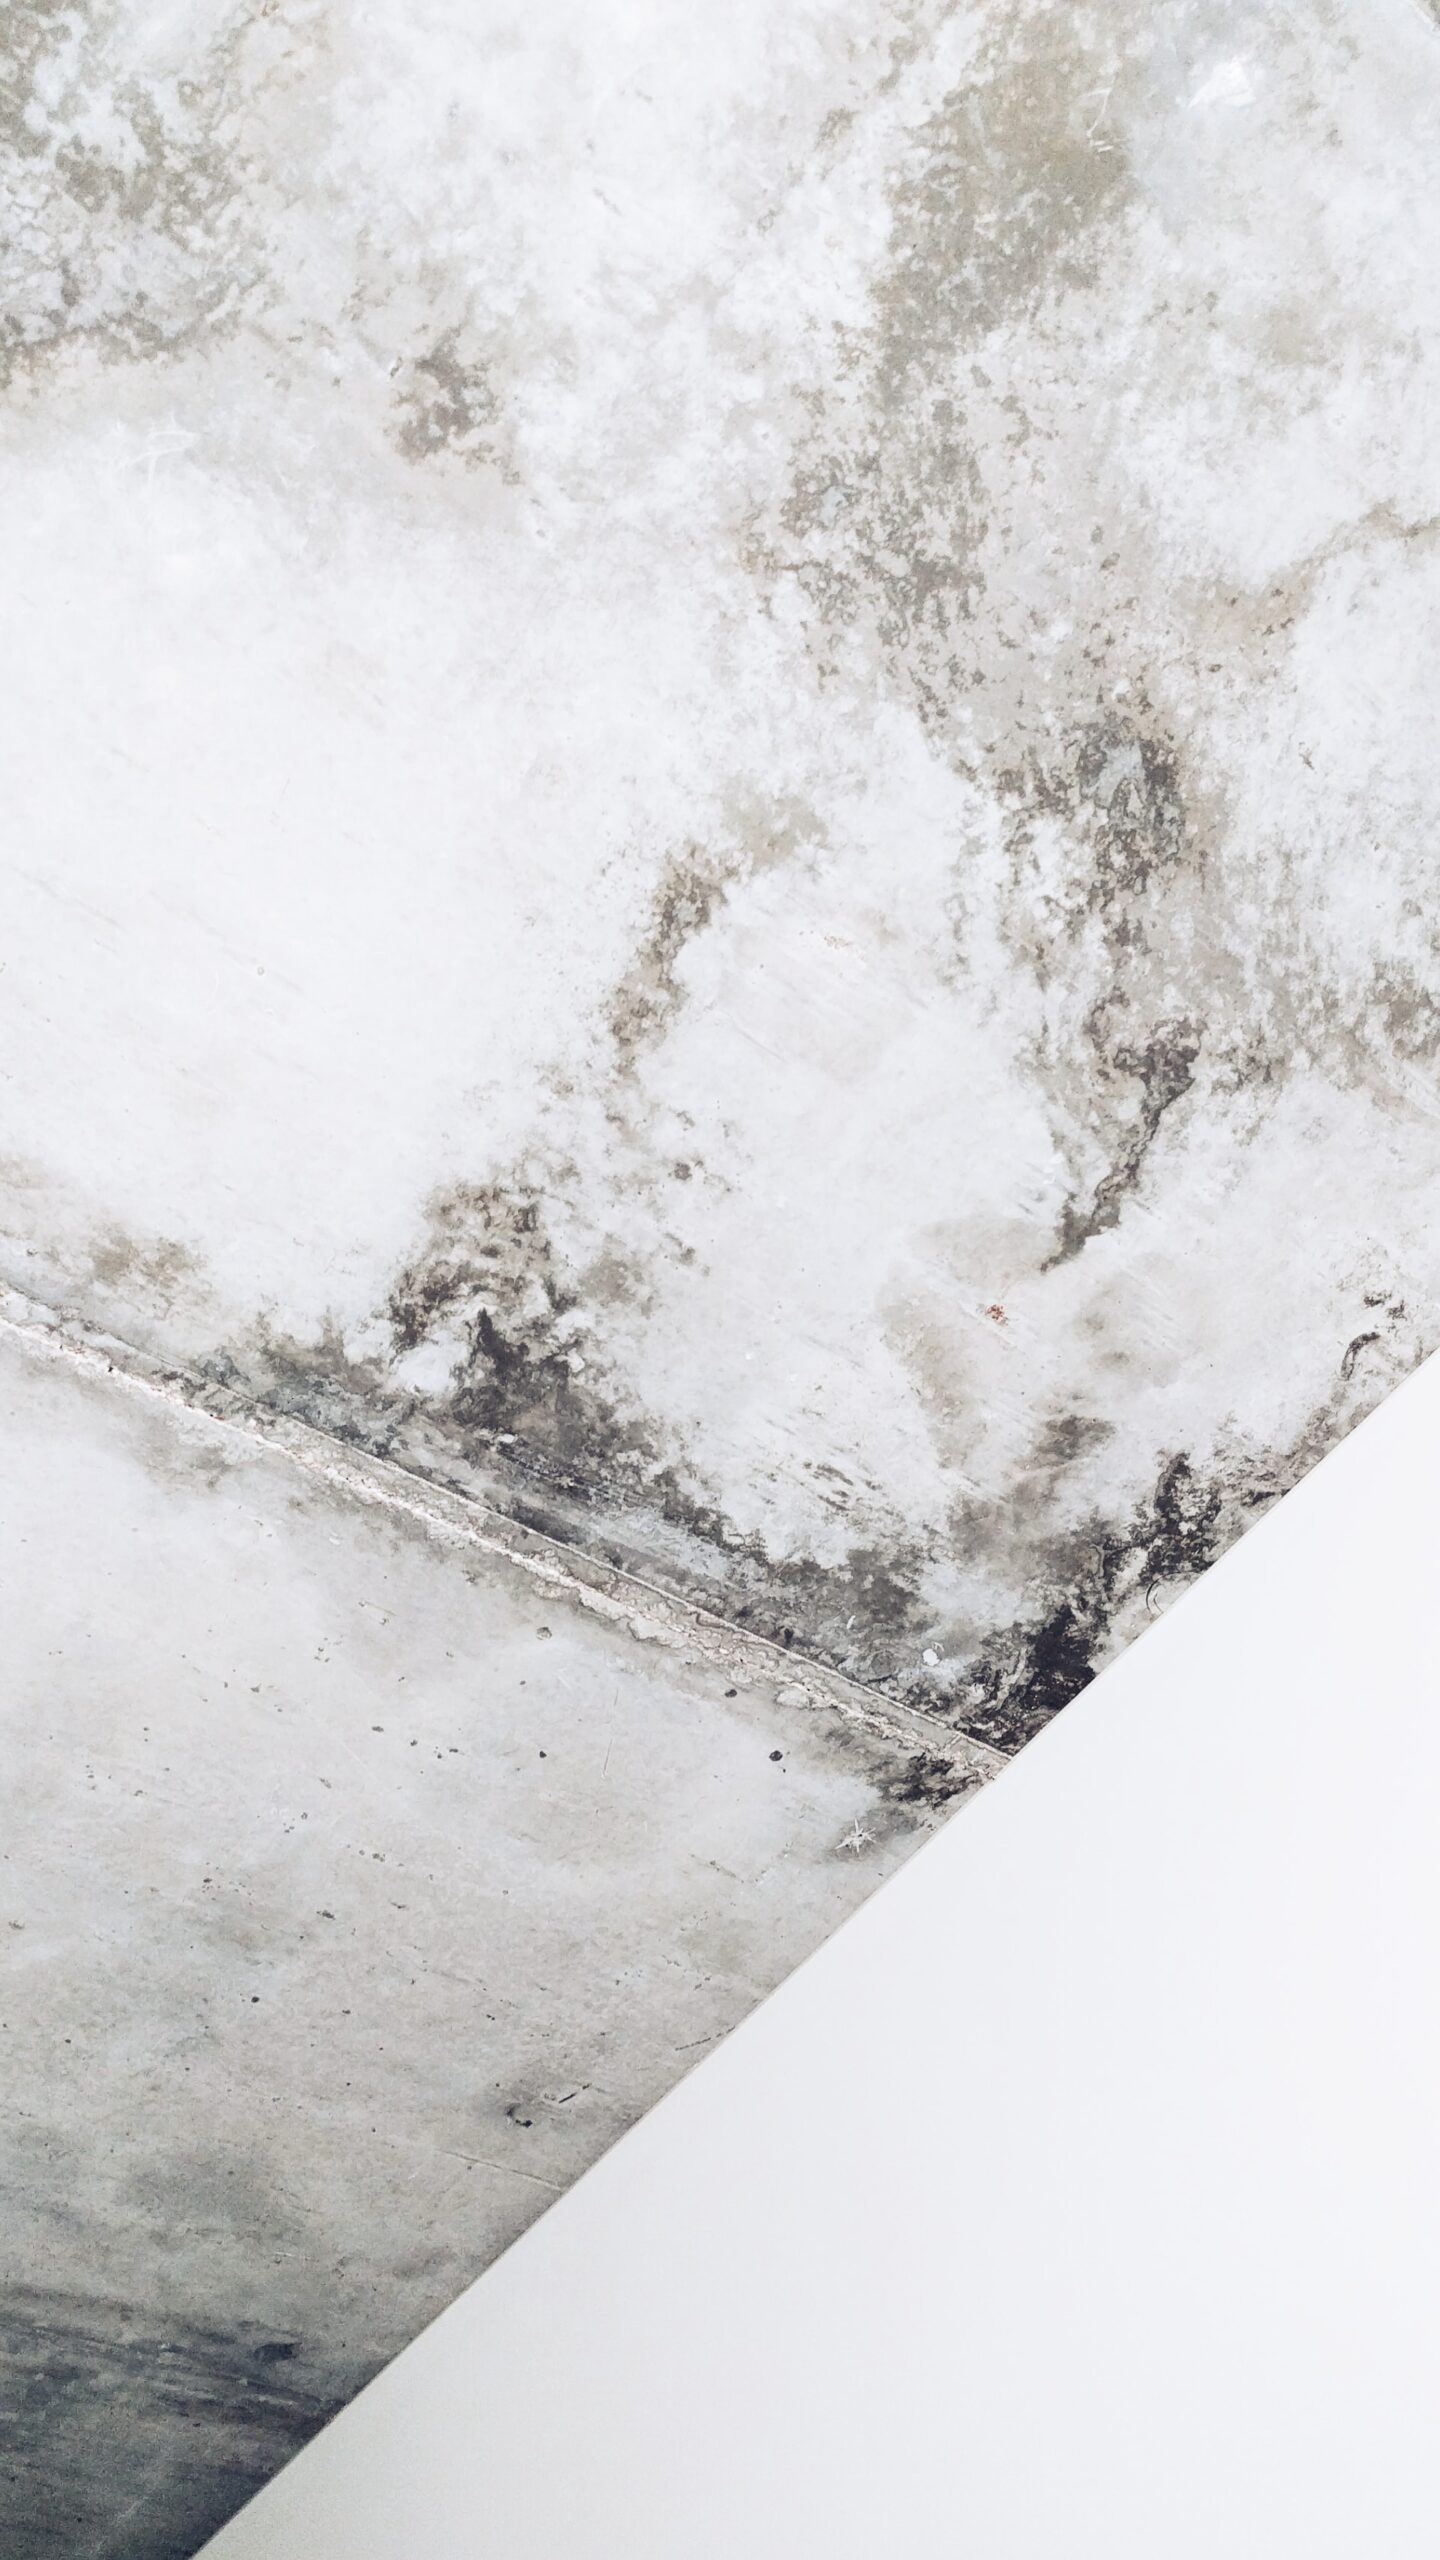 What Makes Someone Qualified to Handle Mold Remediation?